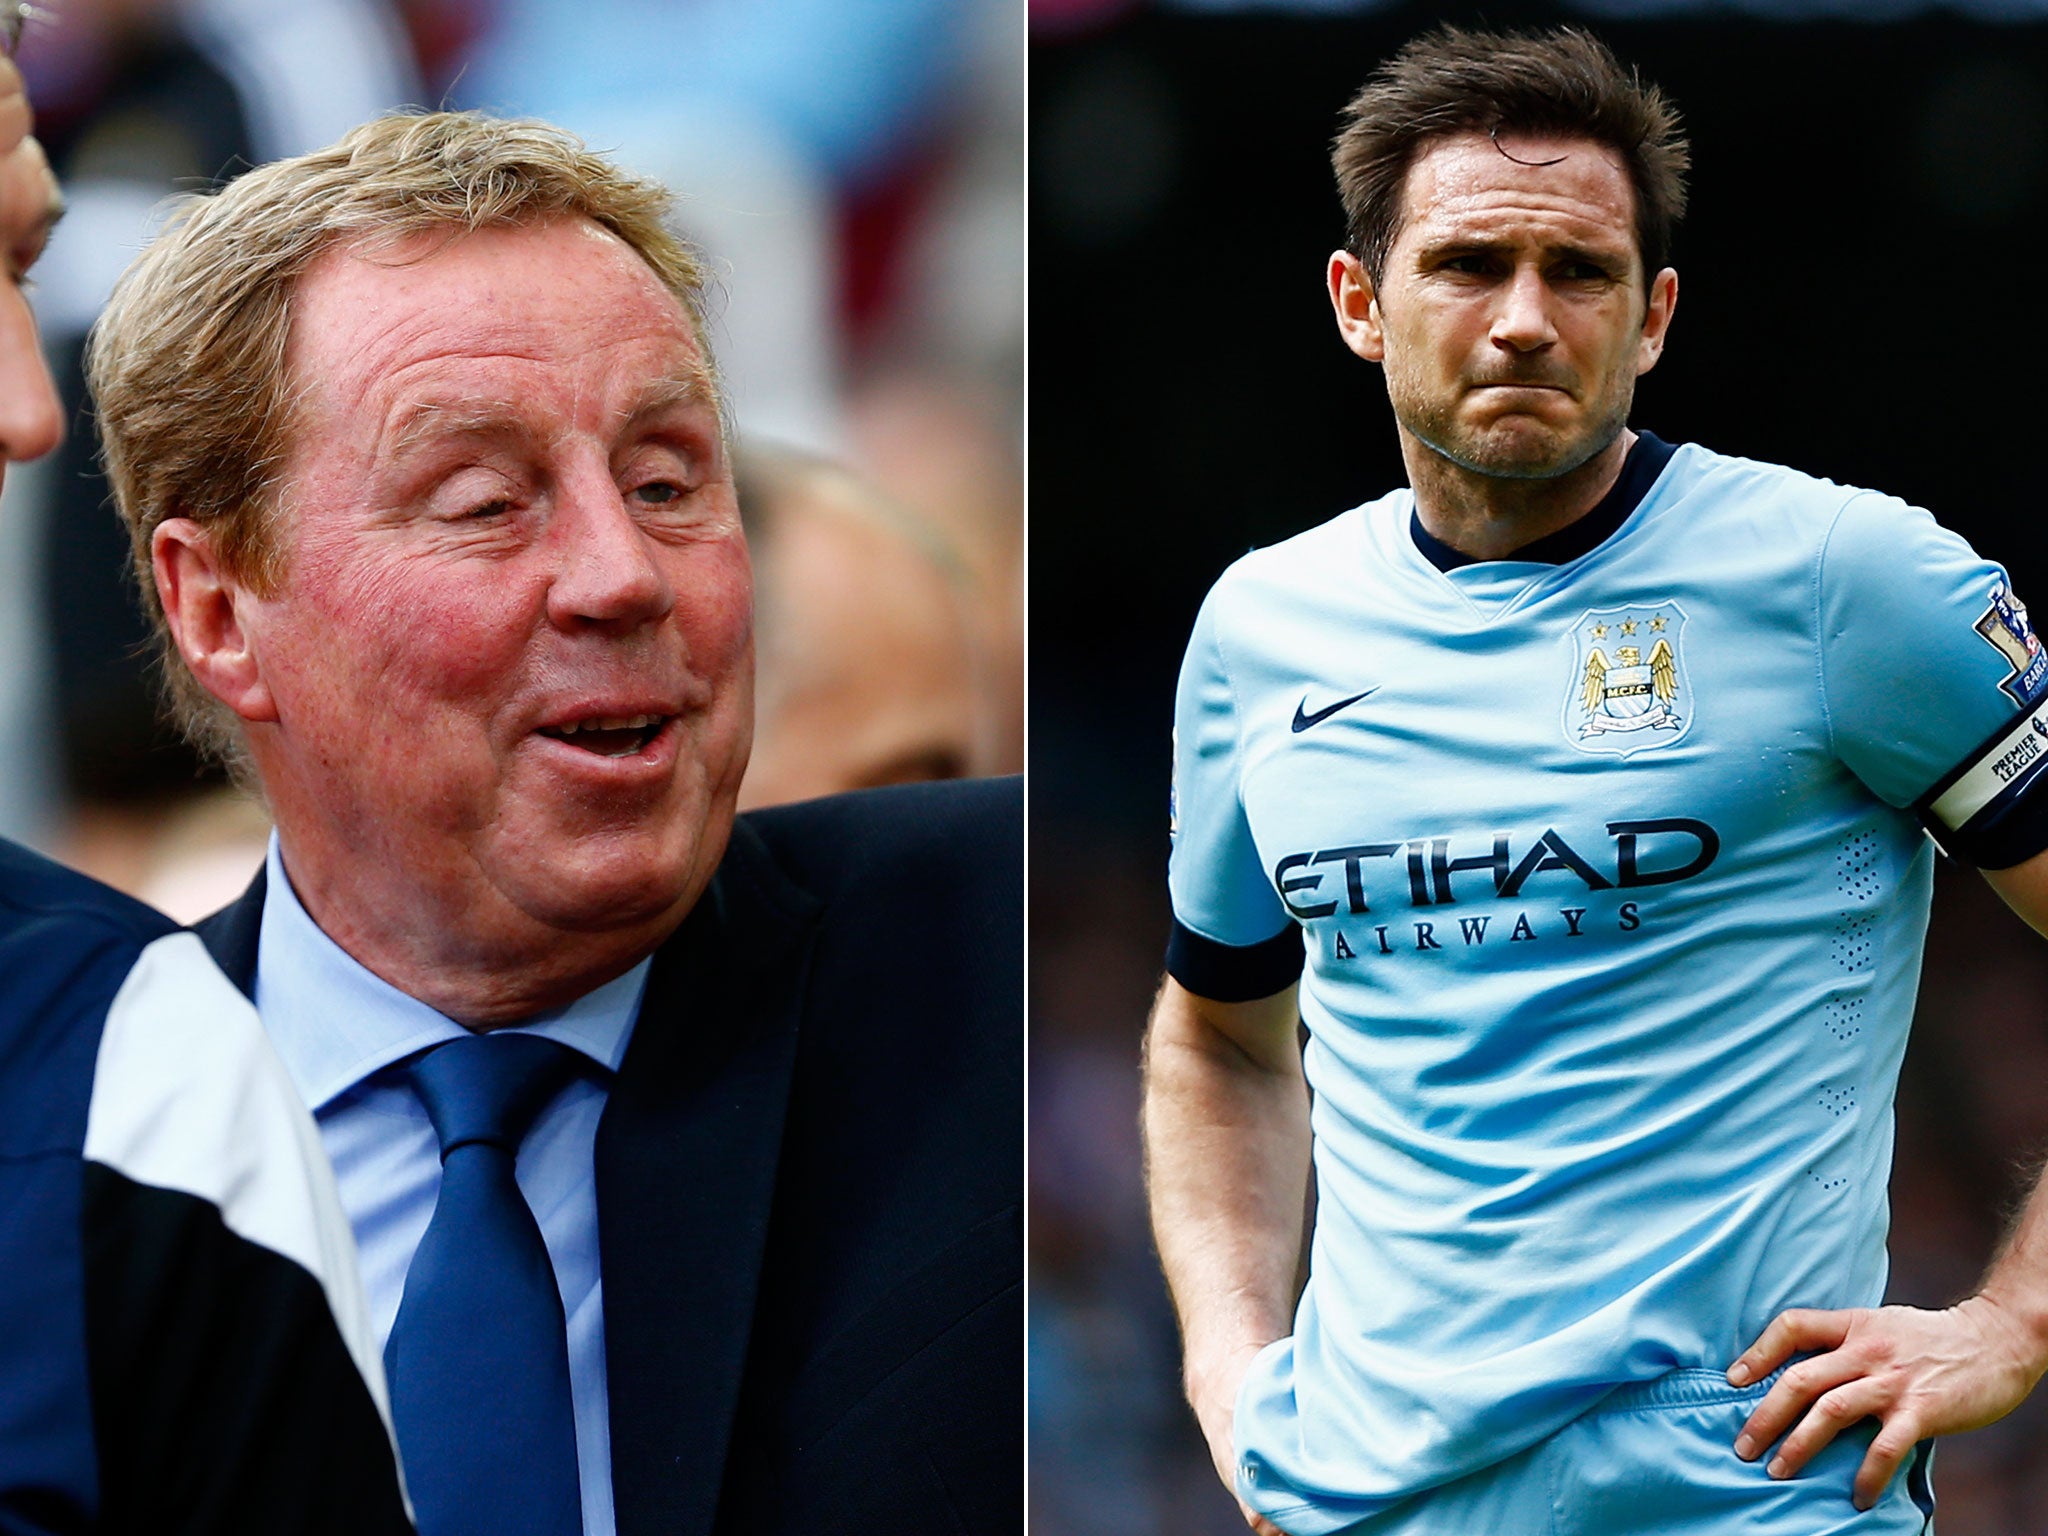 Harry Redknapp and Frank Lampard